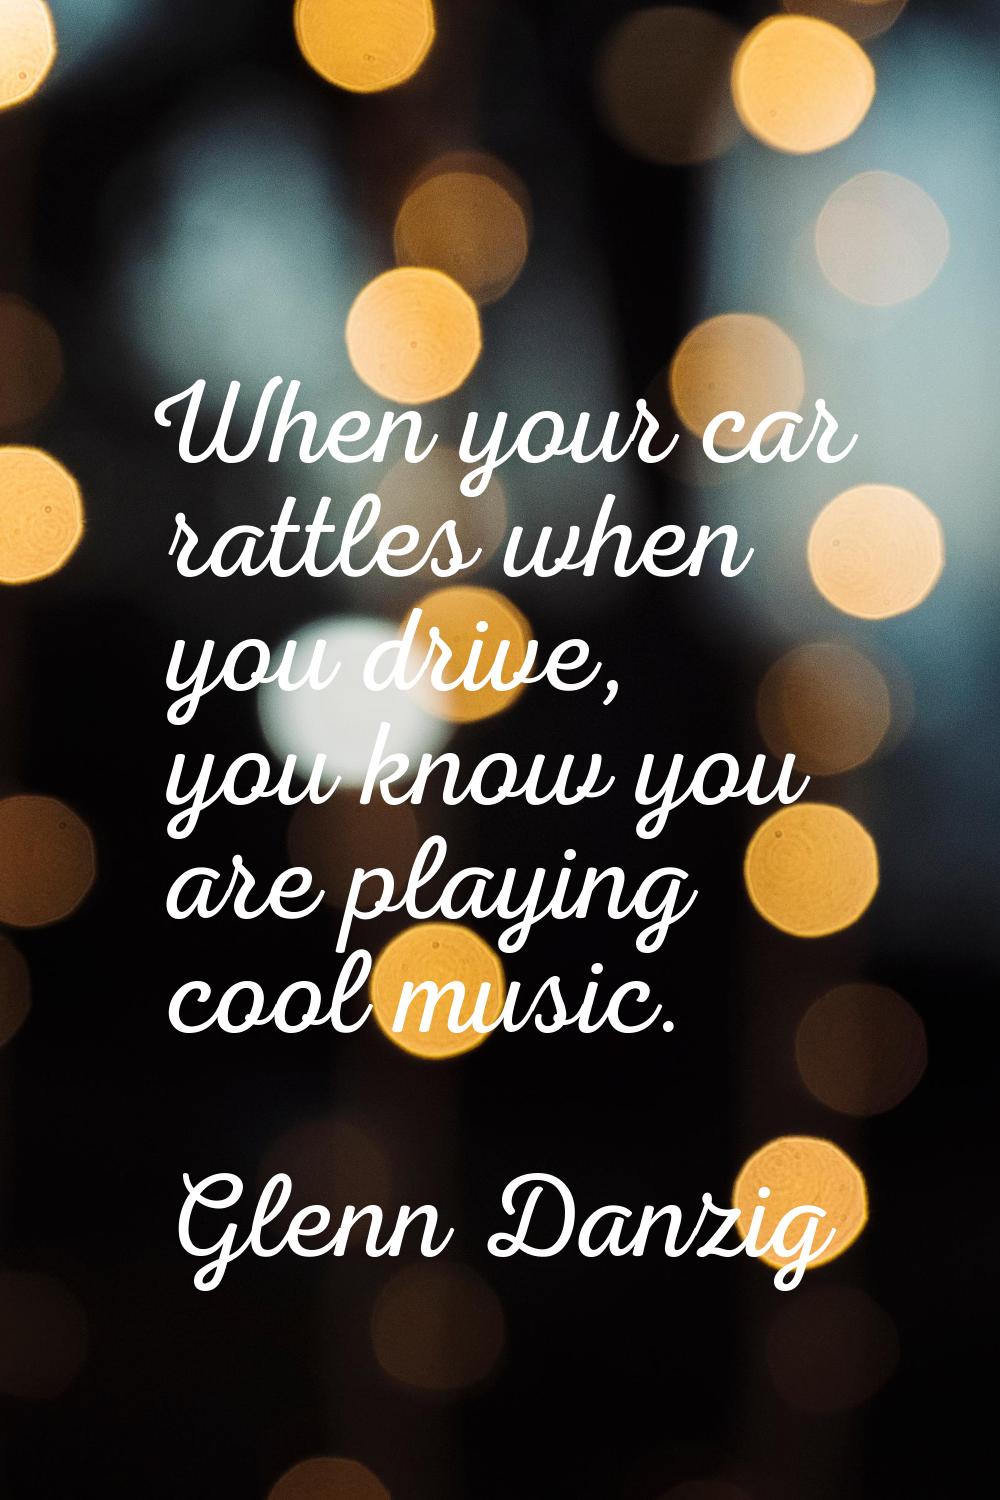 When your car rattles when you drive, you know you are playing cool music.